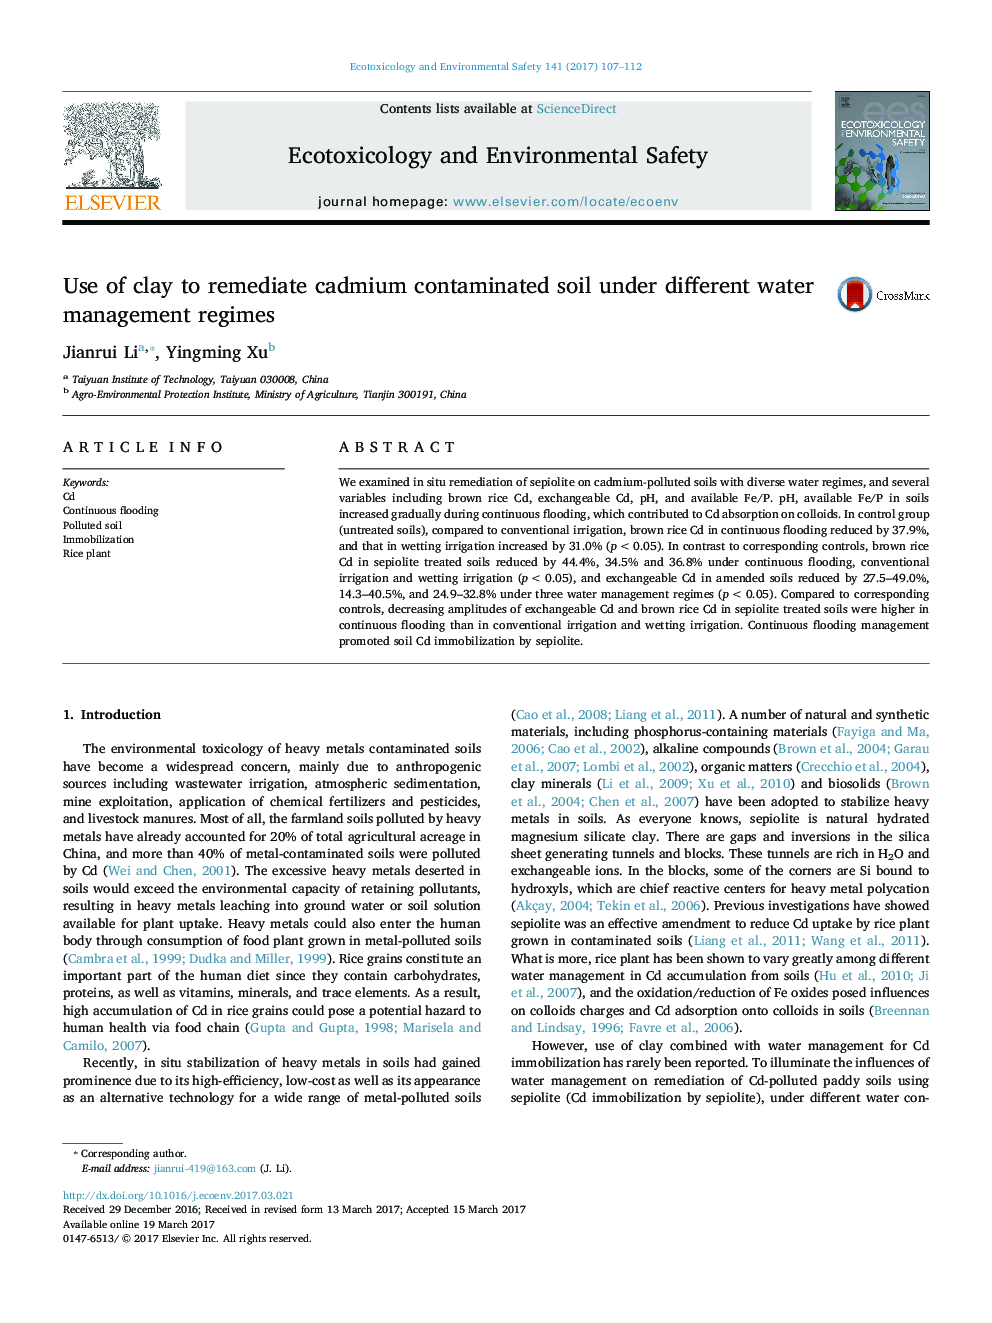 Use of clay to remediate cadmium contaminated soil under different water management regimes